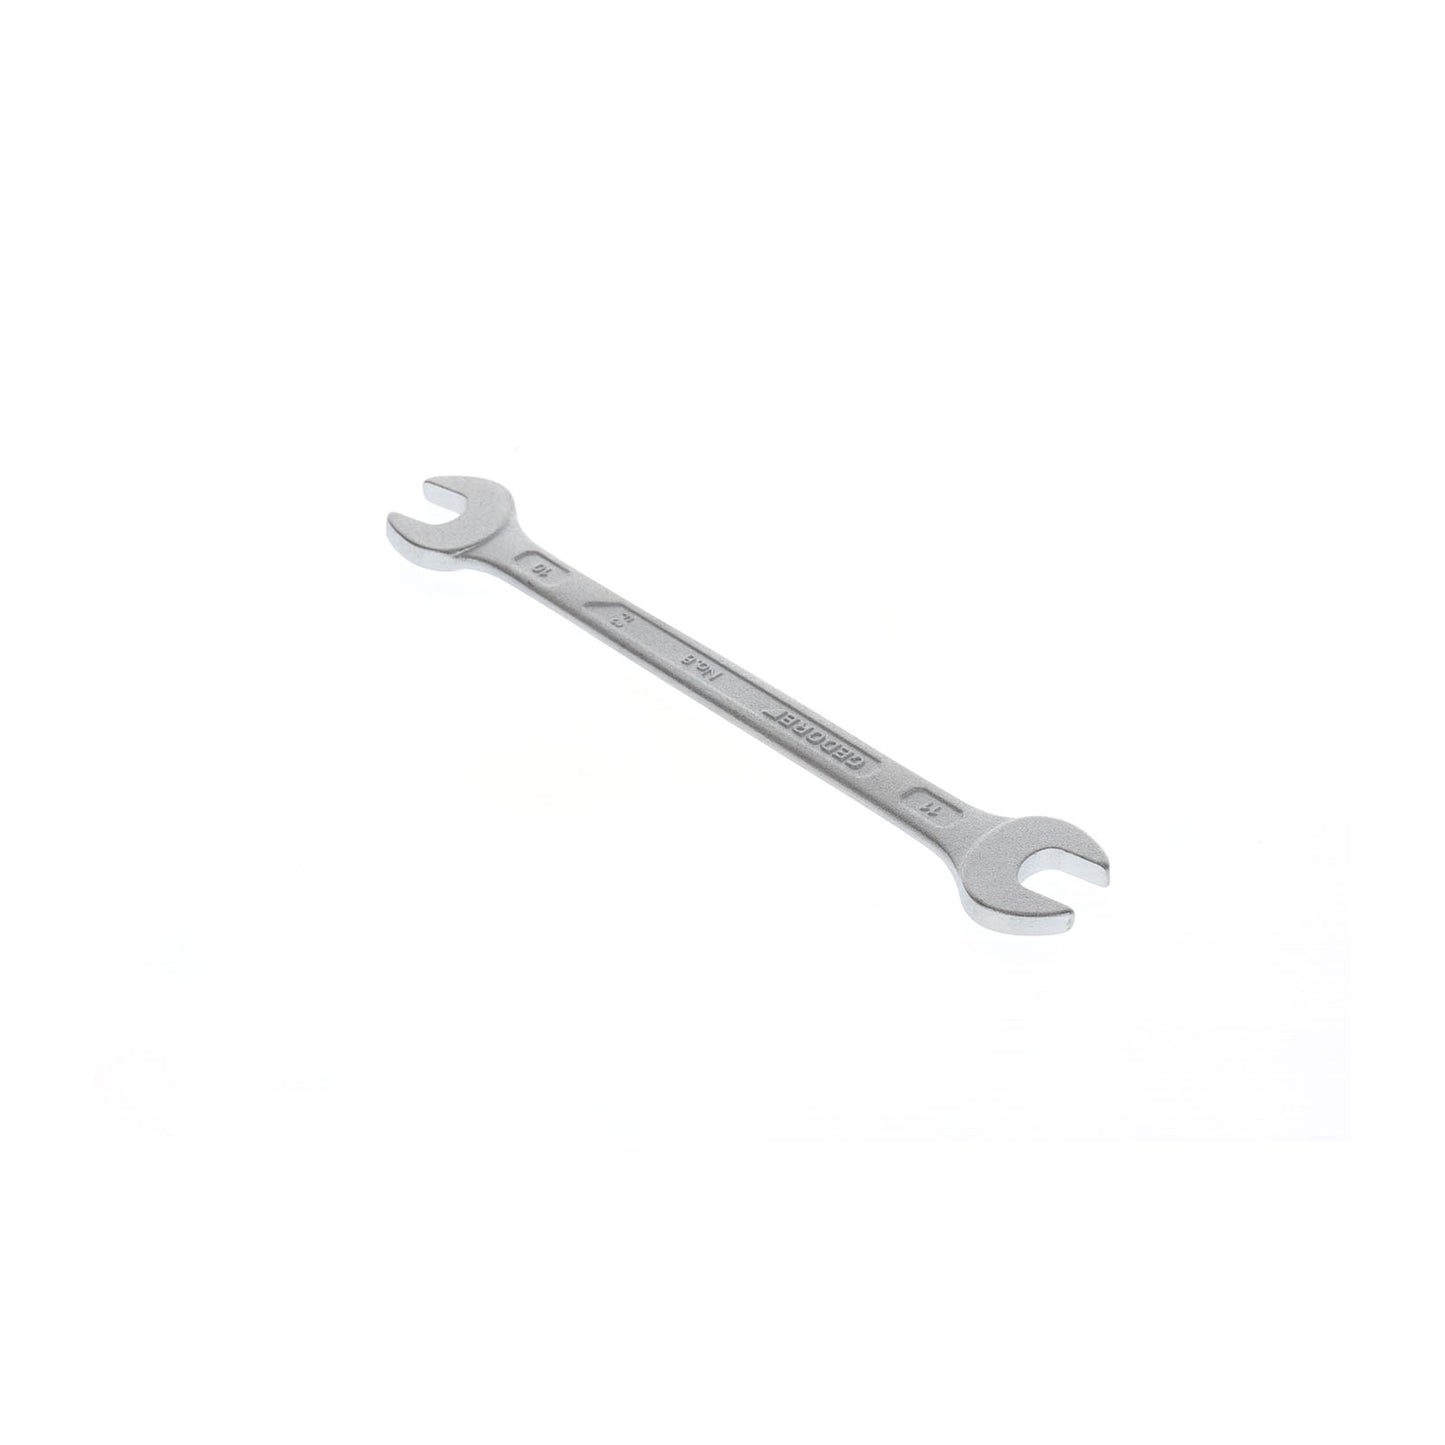 GEDORE 6 10X11 - 2-Mount Fixed Wrench, 10x11 (6064720)